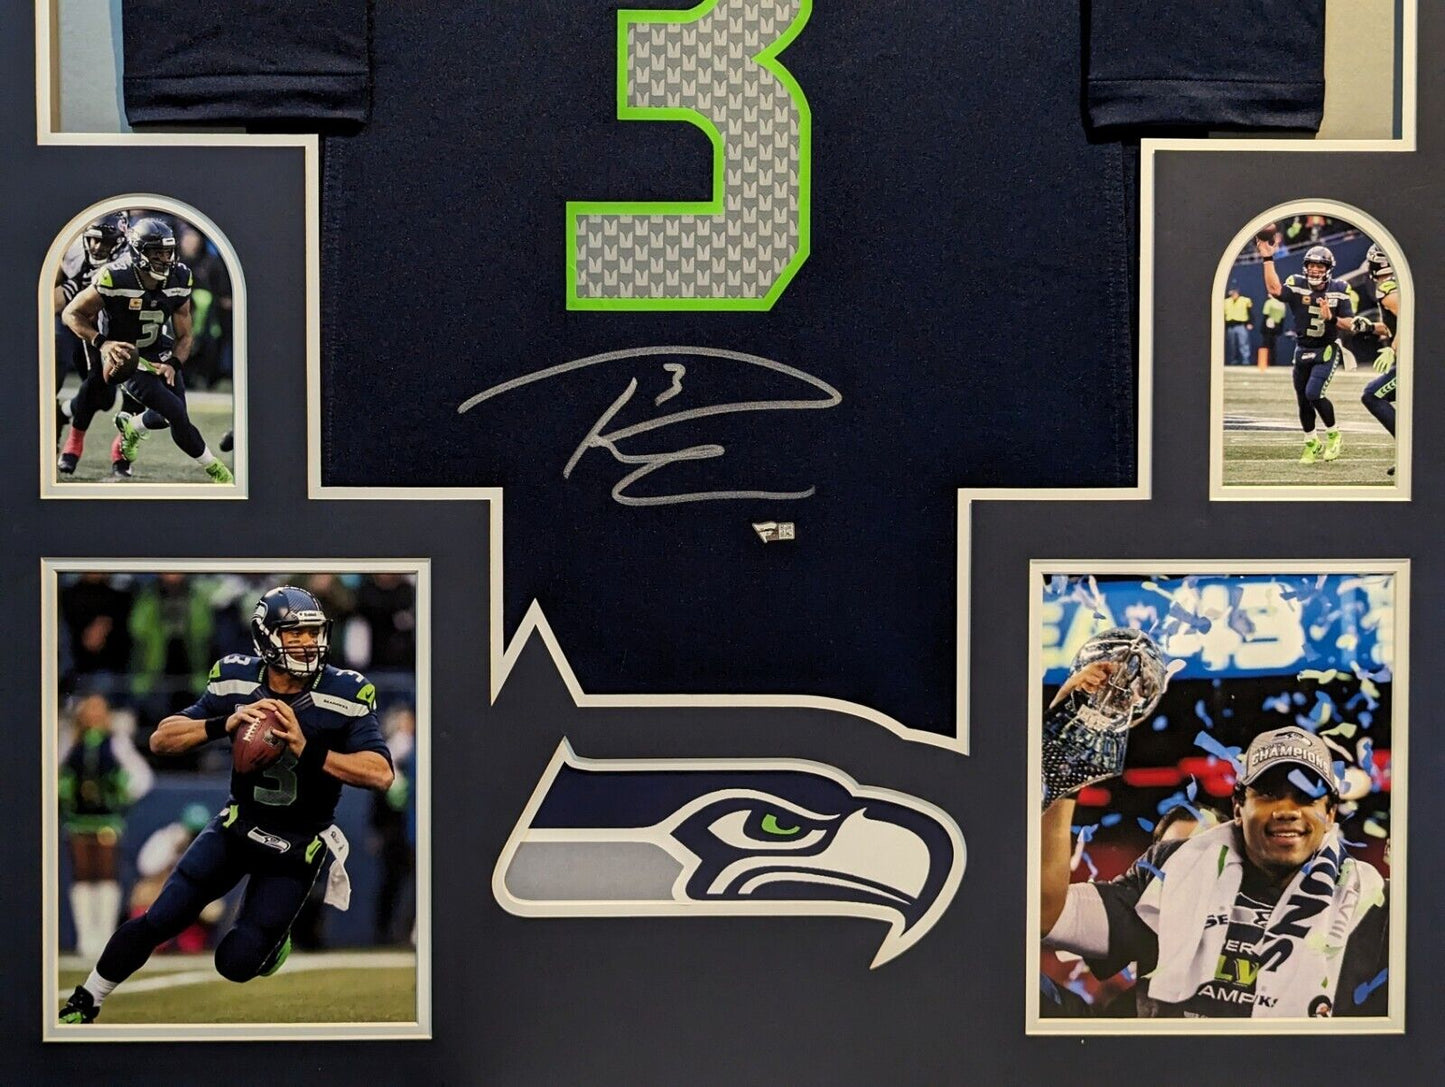 MVP Authentics Framed Seattle Seahawks Russell Wilson Autographed Signed Jersey Fanatics Holo 675 sports jersey framing , jersey framing